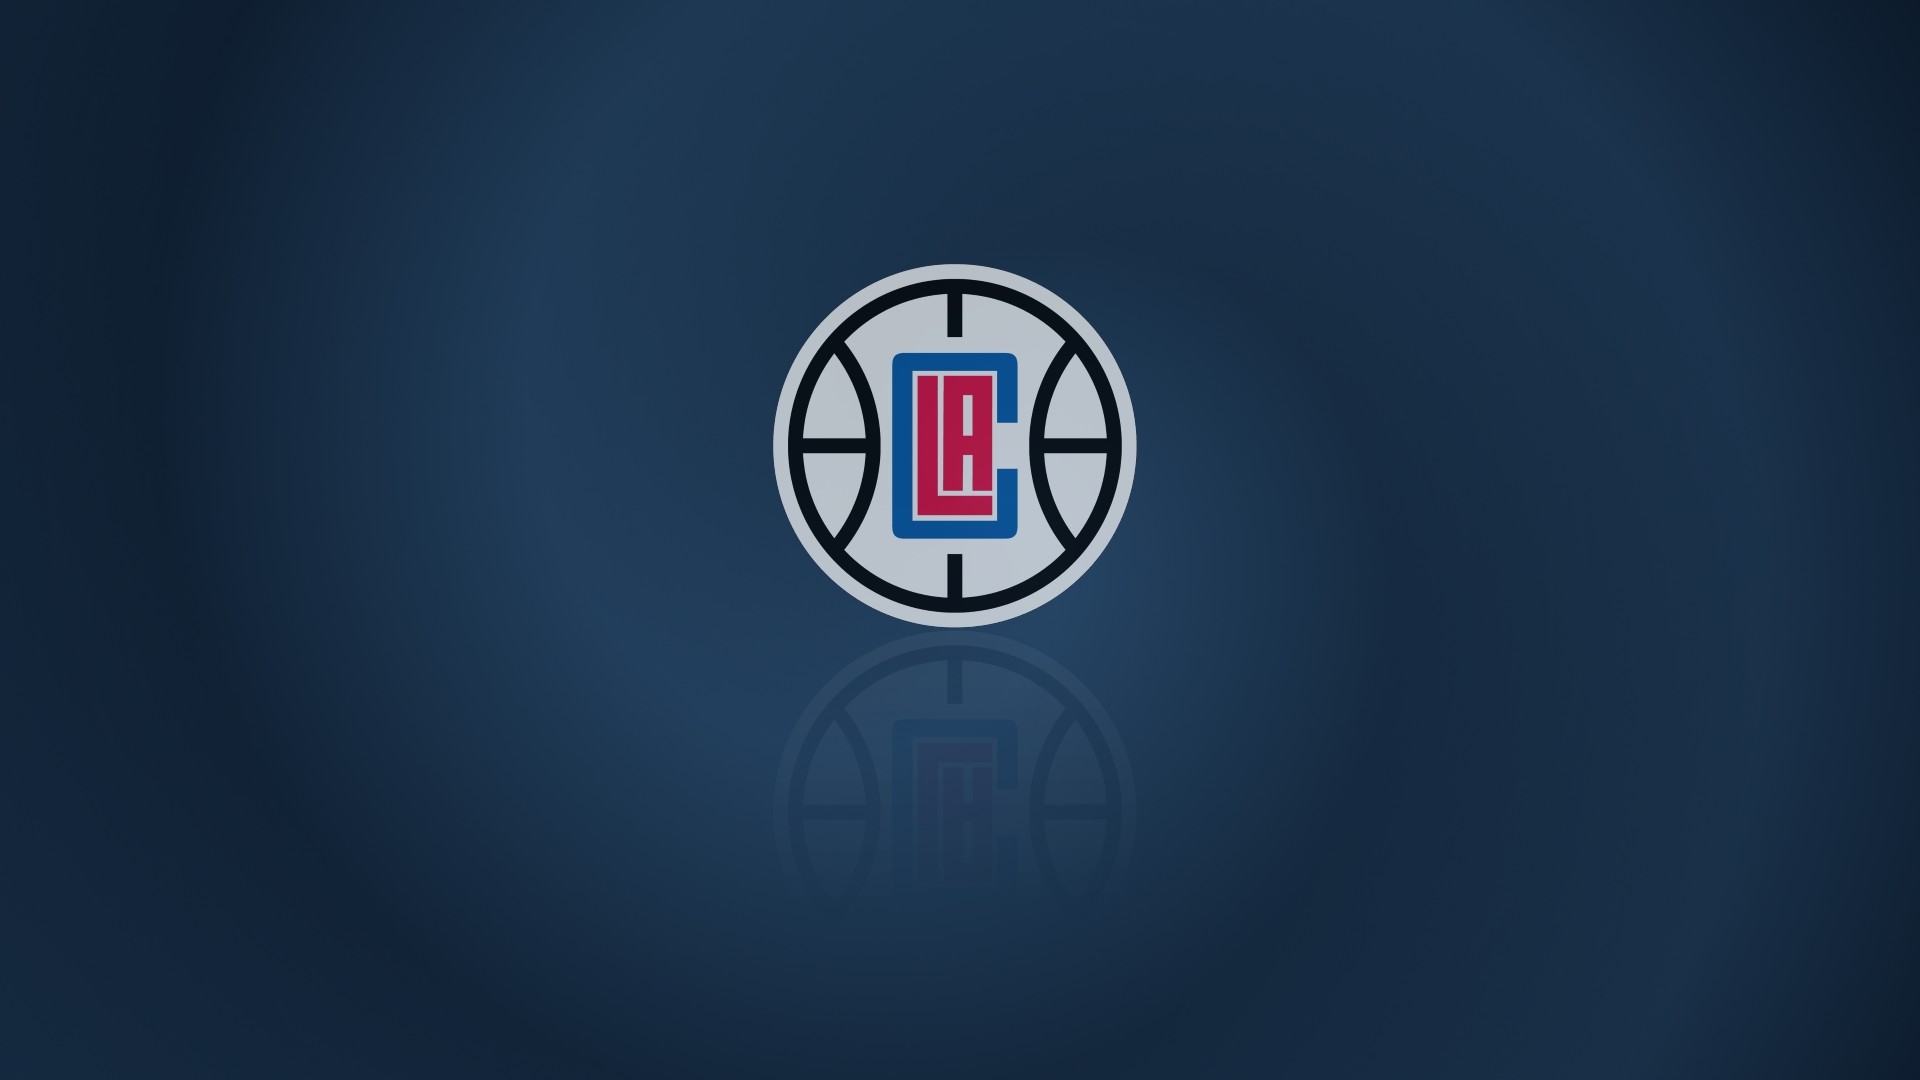 Wallpapers Los Angeles Clippers With high-resolution 1920X1080 pixel. You can use this wallpaper for your Desktop Computer Backgrounds, Windows or Mac Screensavers, iPhone Lock screen, Tablet or Android and another Mobile Phone device